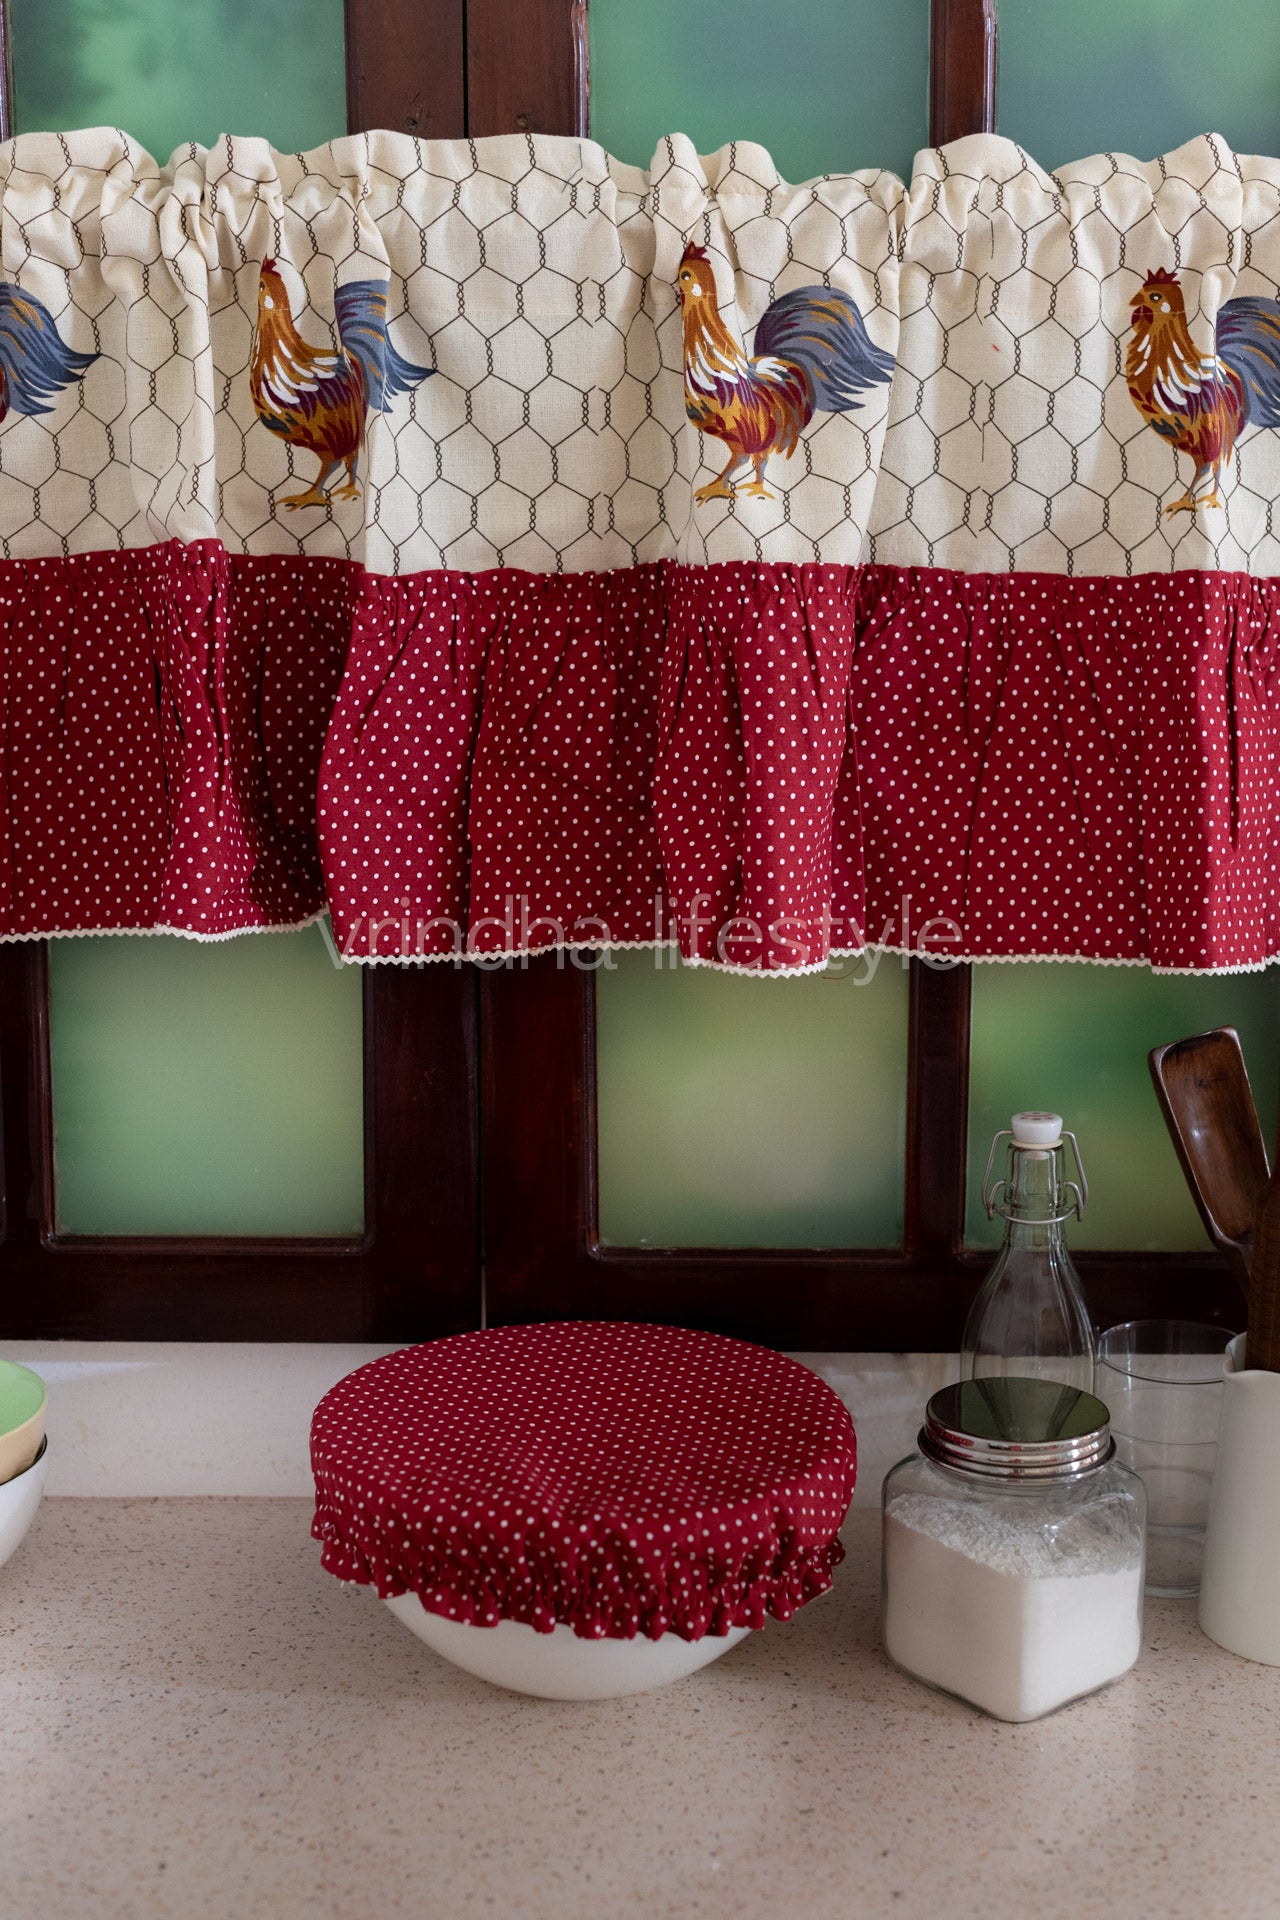 KITCHEN VALANCE-Cotton printed with frill and  lace detailing